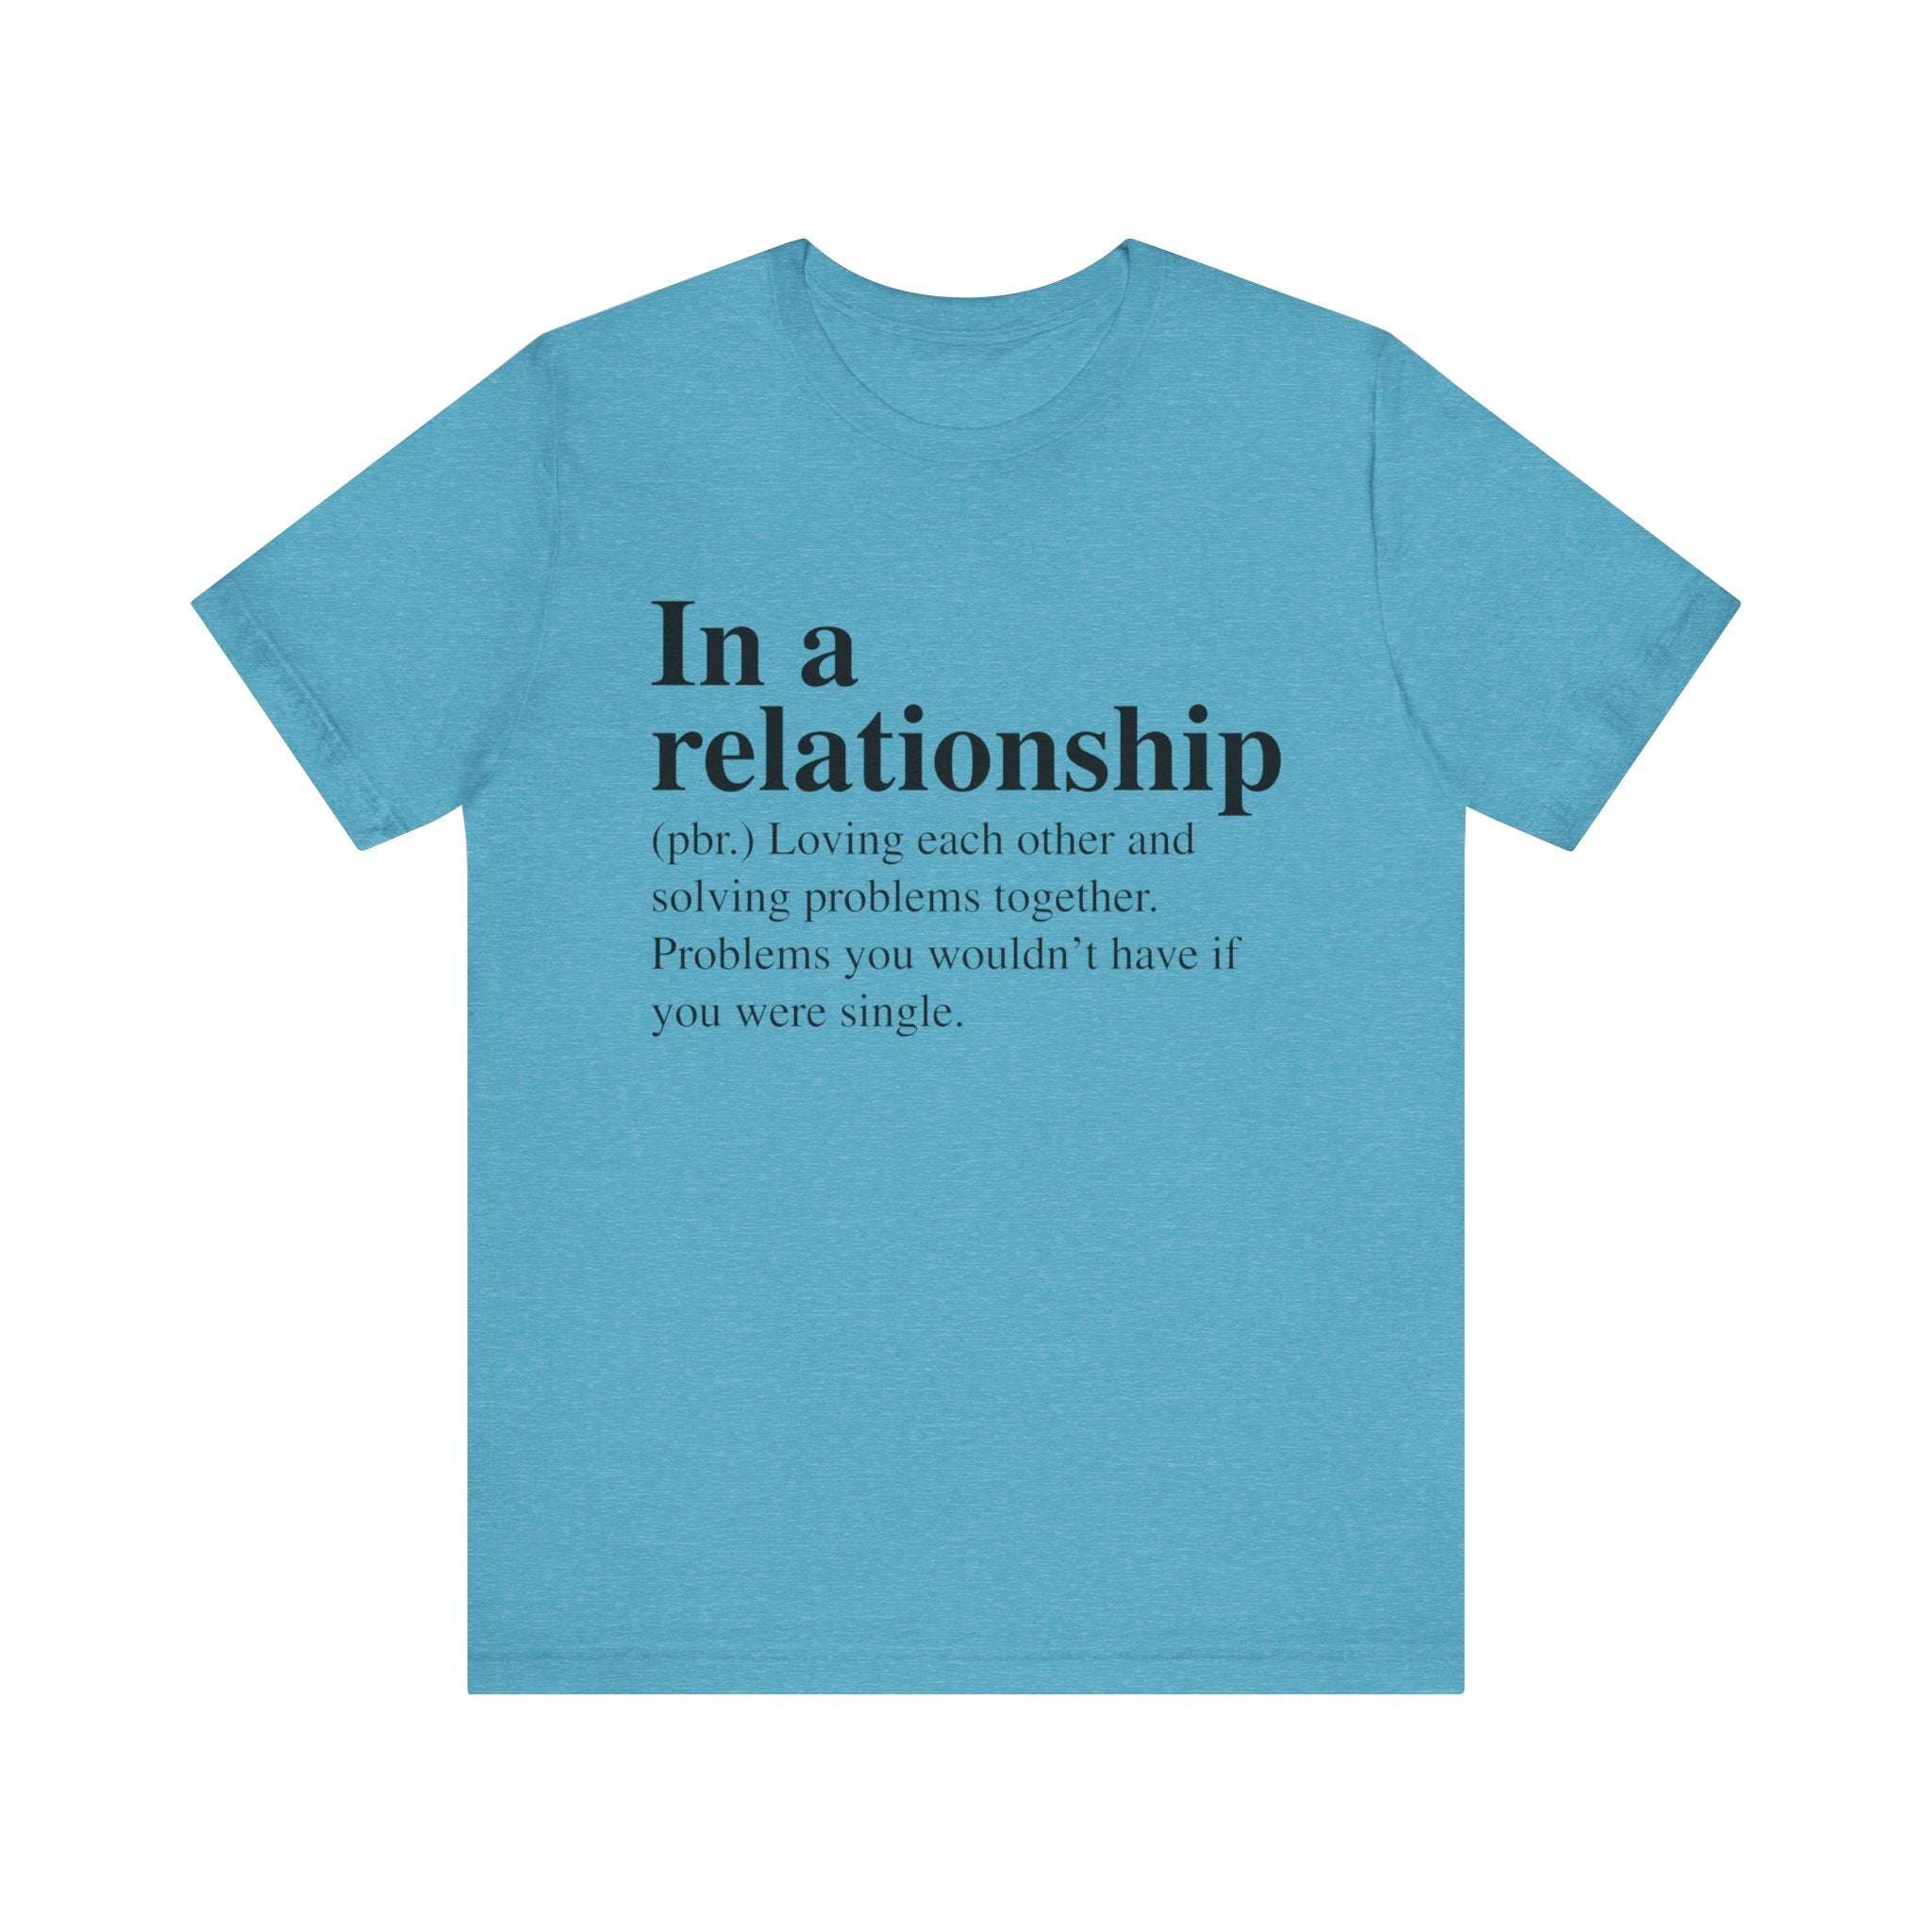 Unisex jersey tee in light blue with text "In a Relationship (pb): loving each other and solving problems you wouldn't have if you were single.